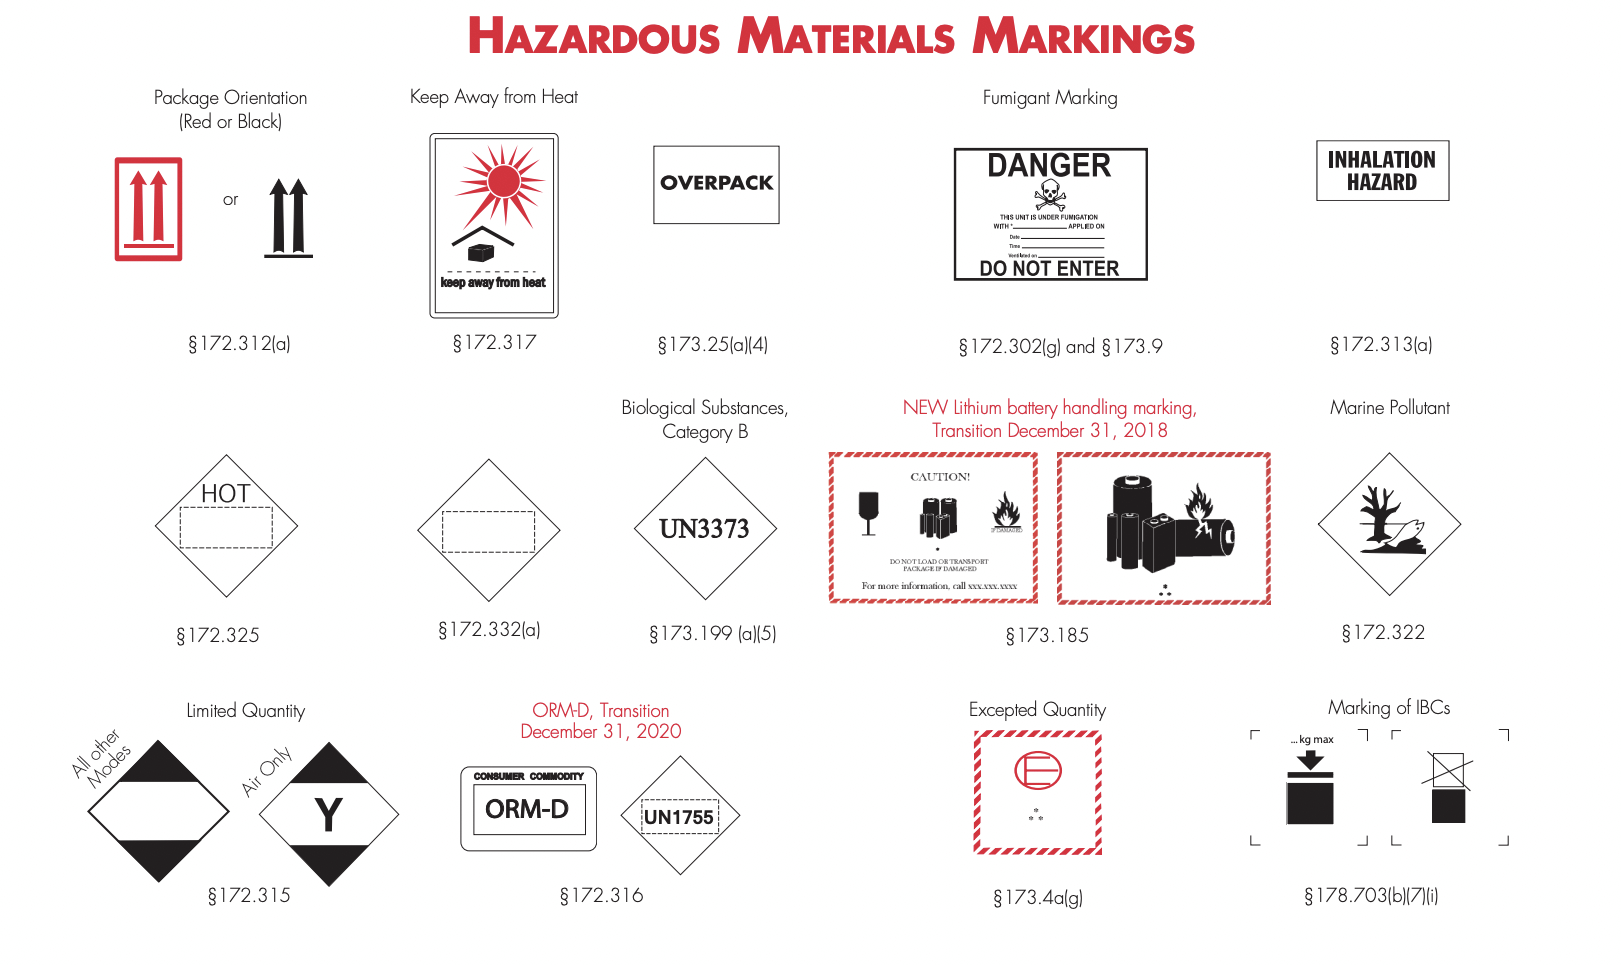 Chart showing Hazardous Materials Markings prepared by U.S. Department of Transportation.